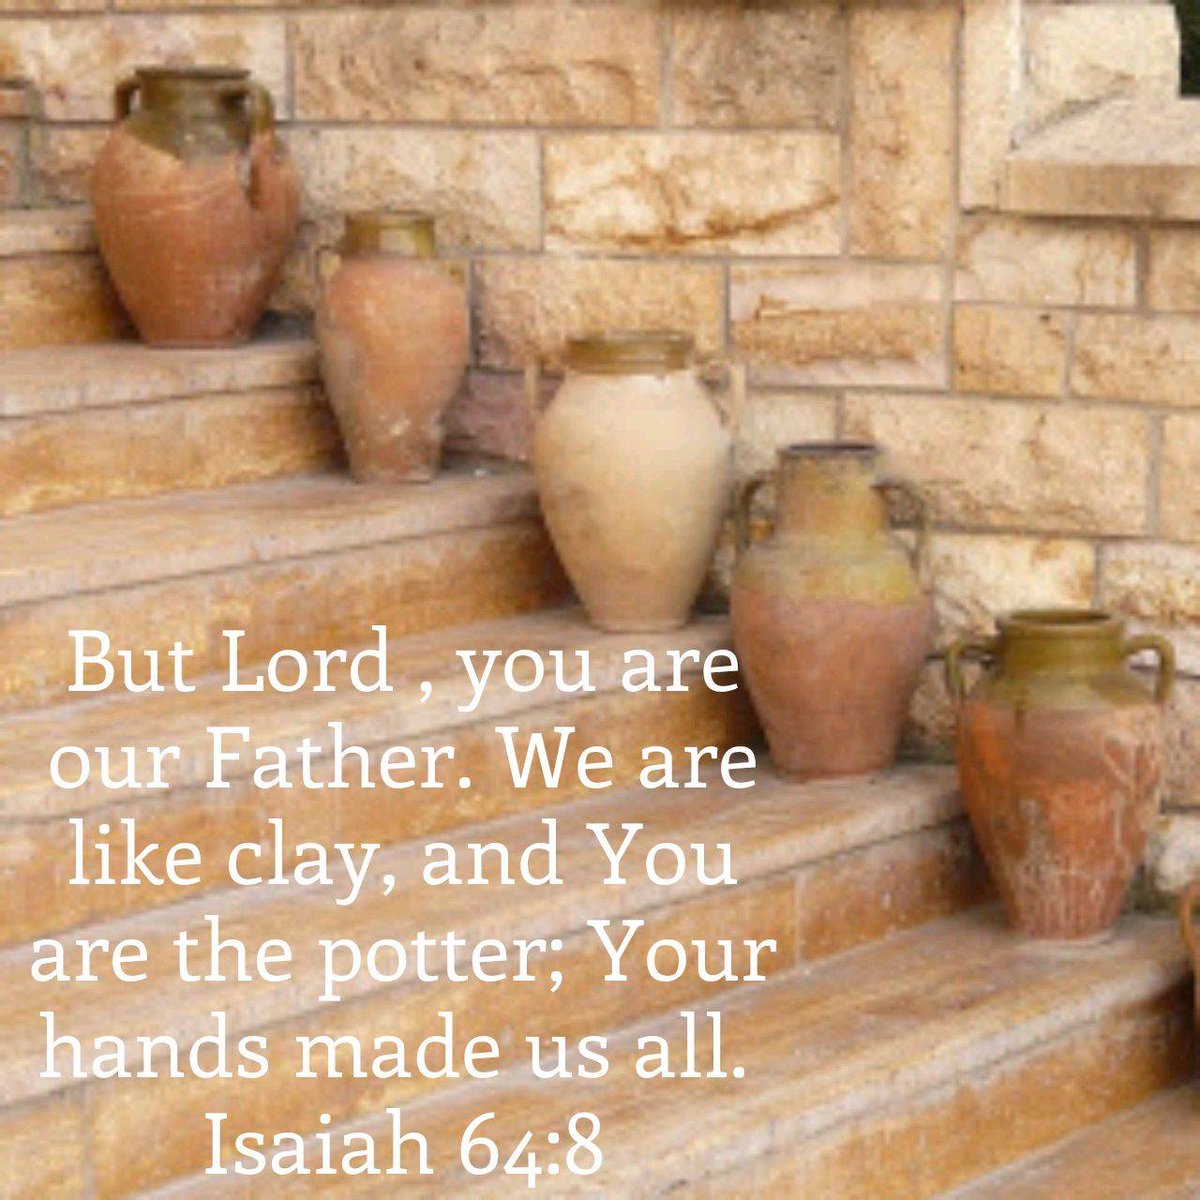 #Father   #Potter   #Made   #By   #Your   #Hands
#TheWord
#JesusSaves
#TheMessageDaily